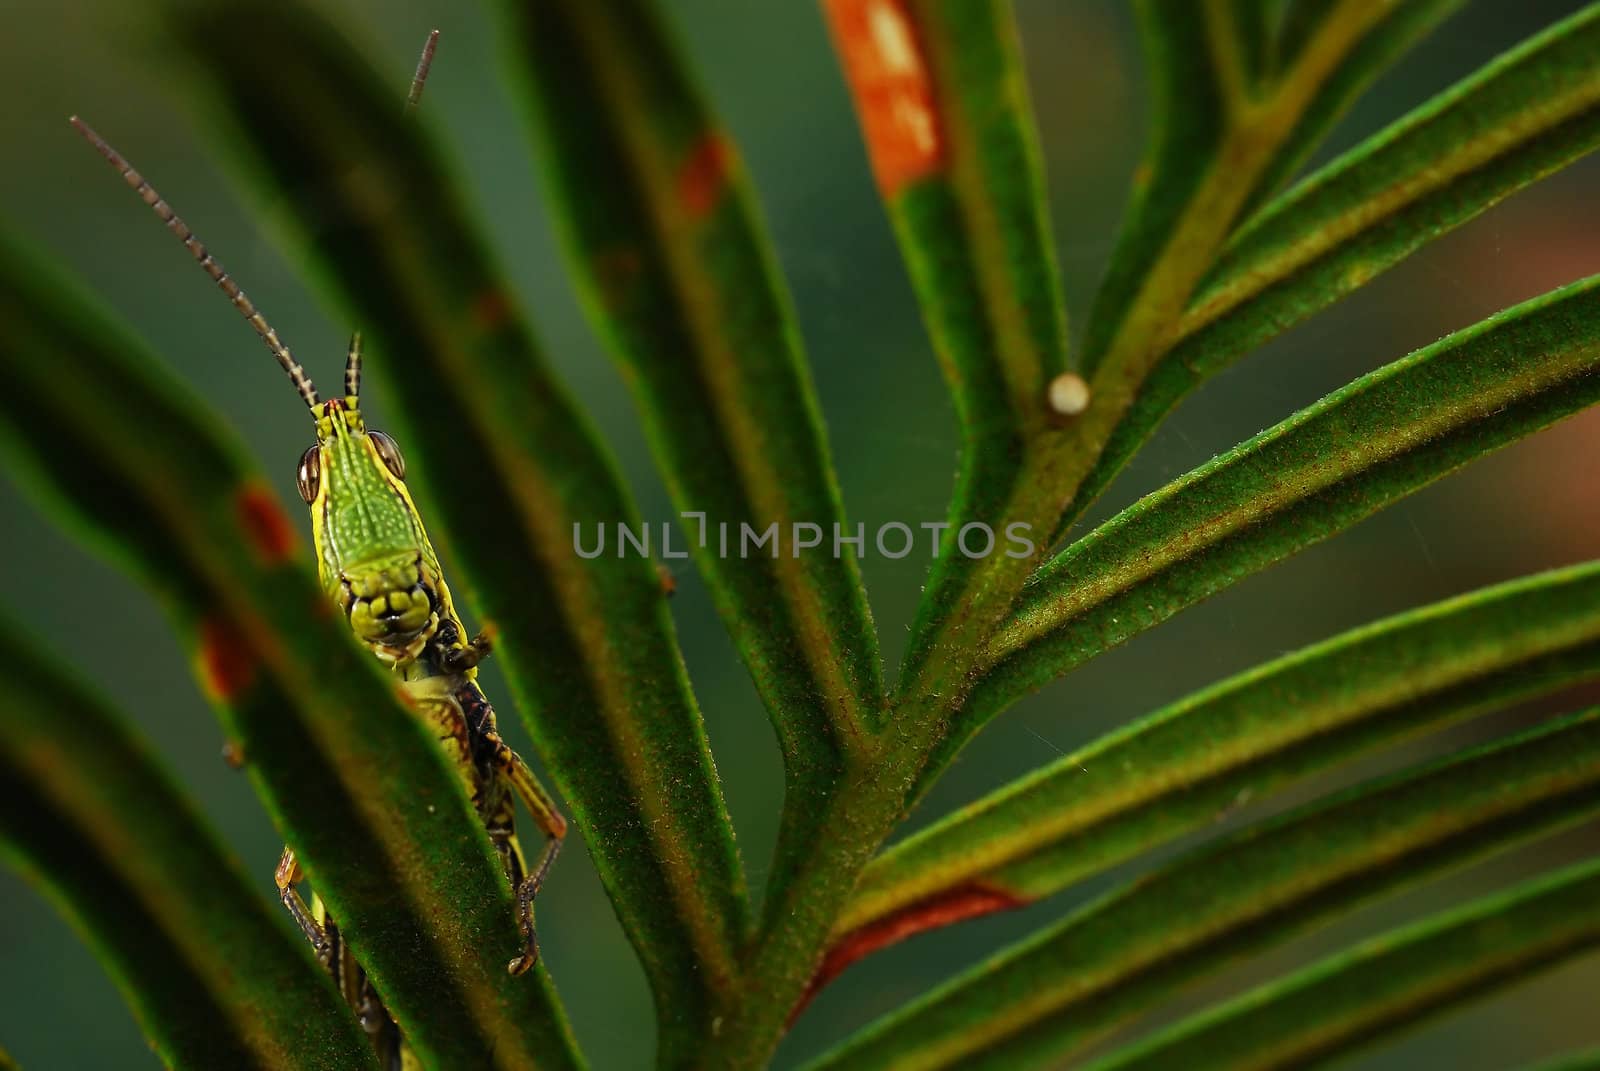 a grasshopper was hiding behind leaves